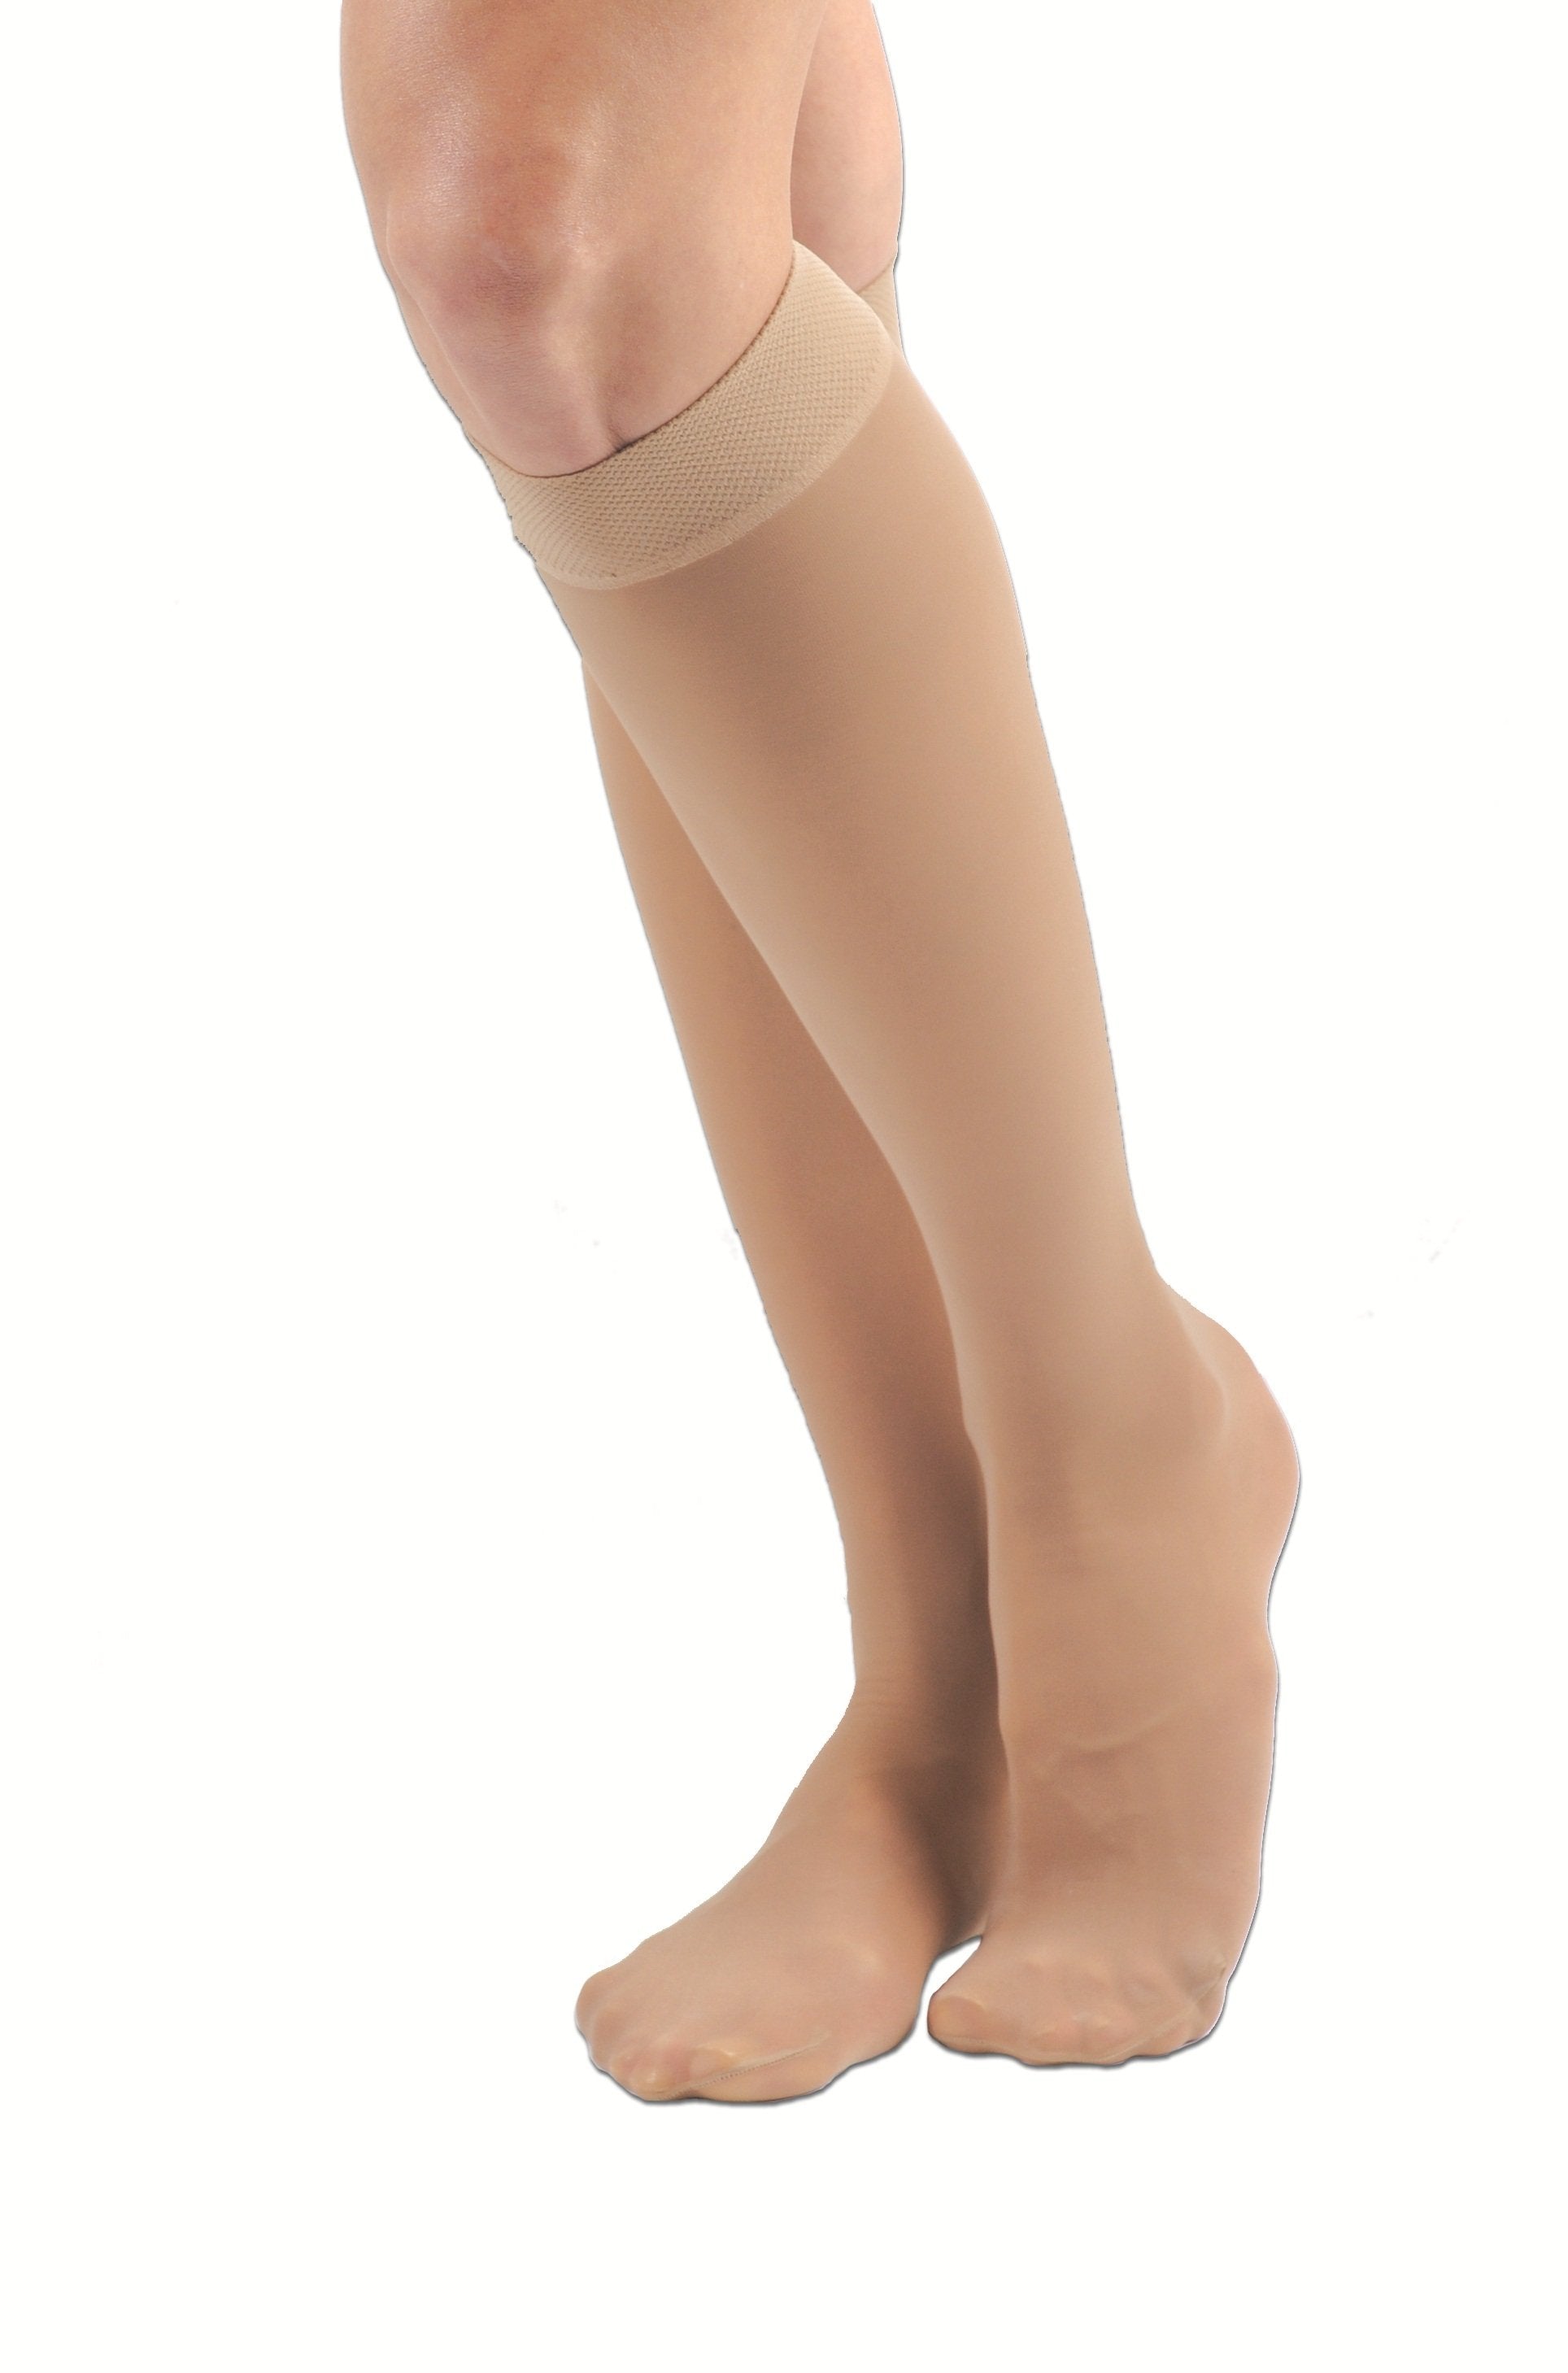 Closed Toe Knee High Nude Compression Stockings